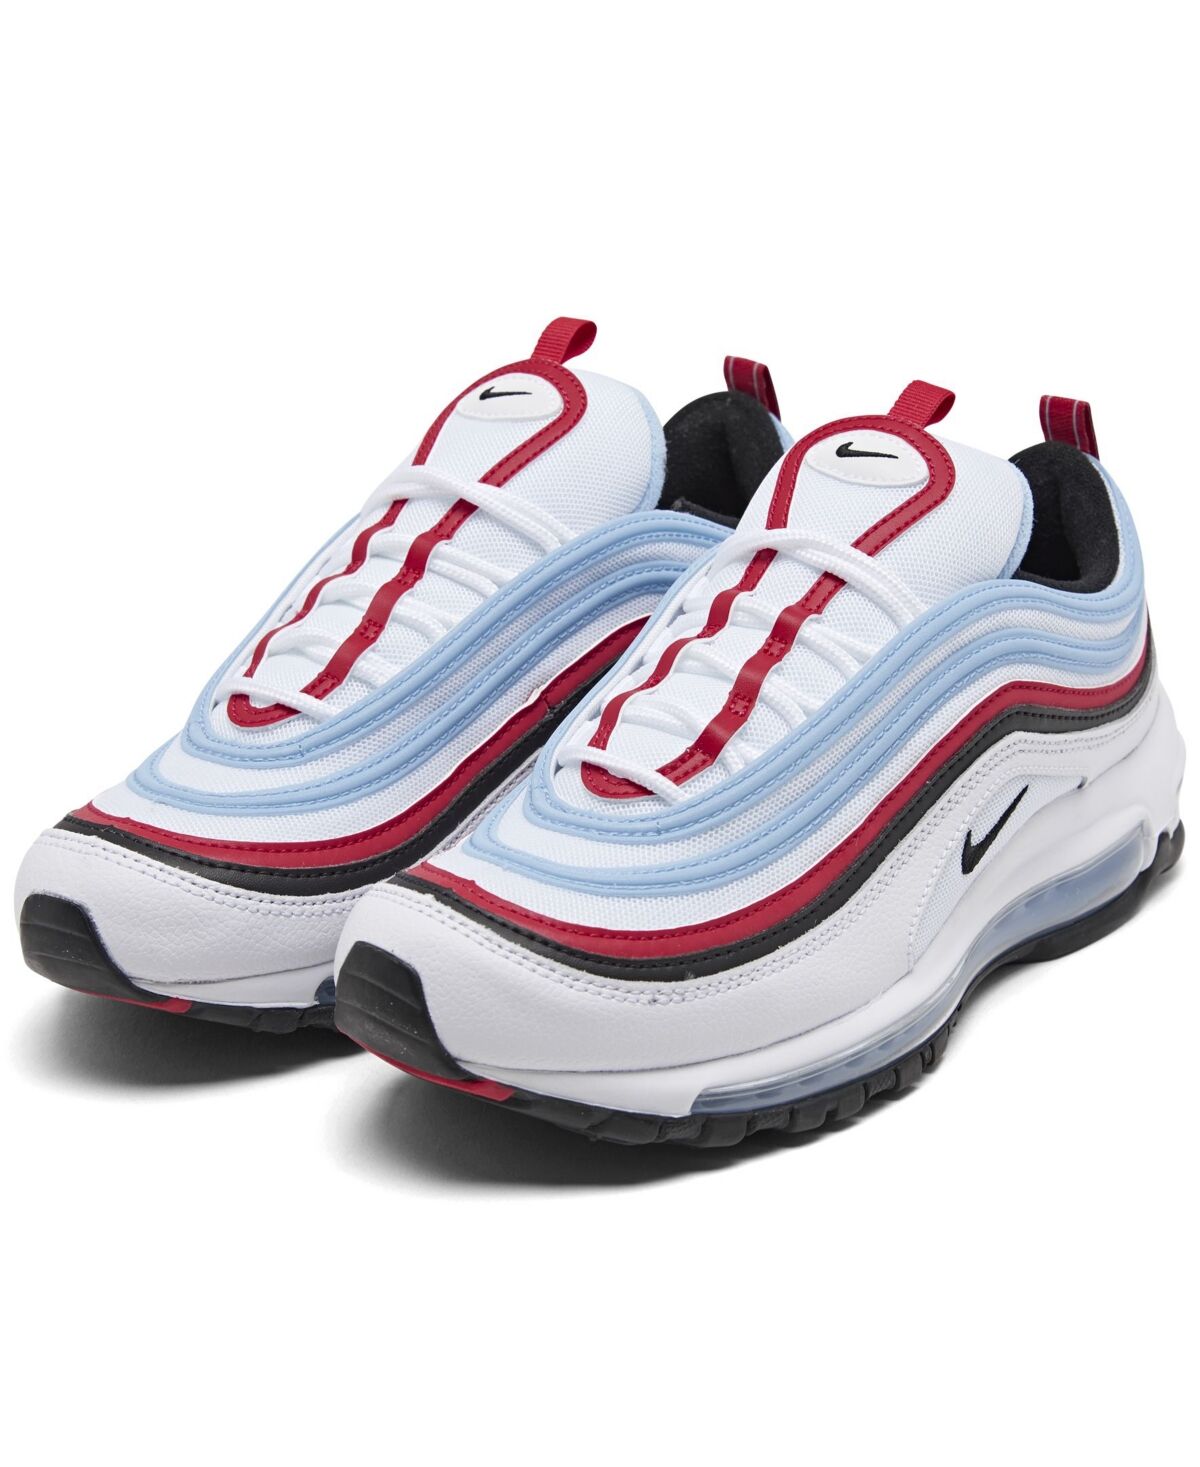 Nike Men's Air Max 97 Casual Sneakers from Finish Line - White, Black